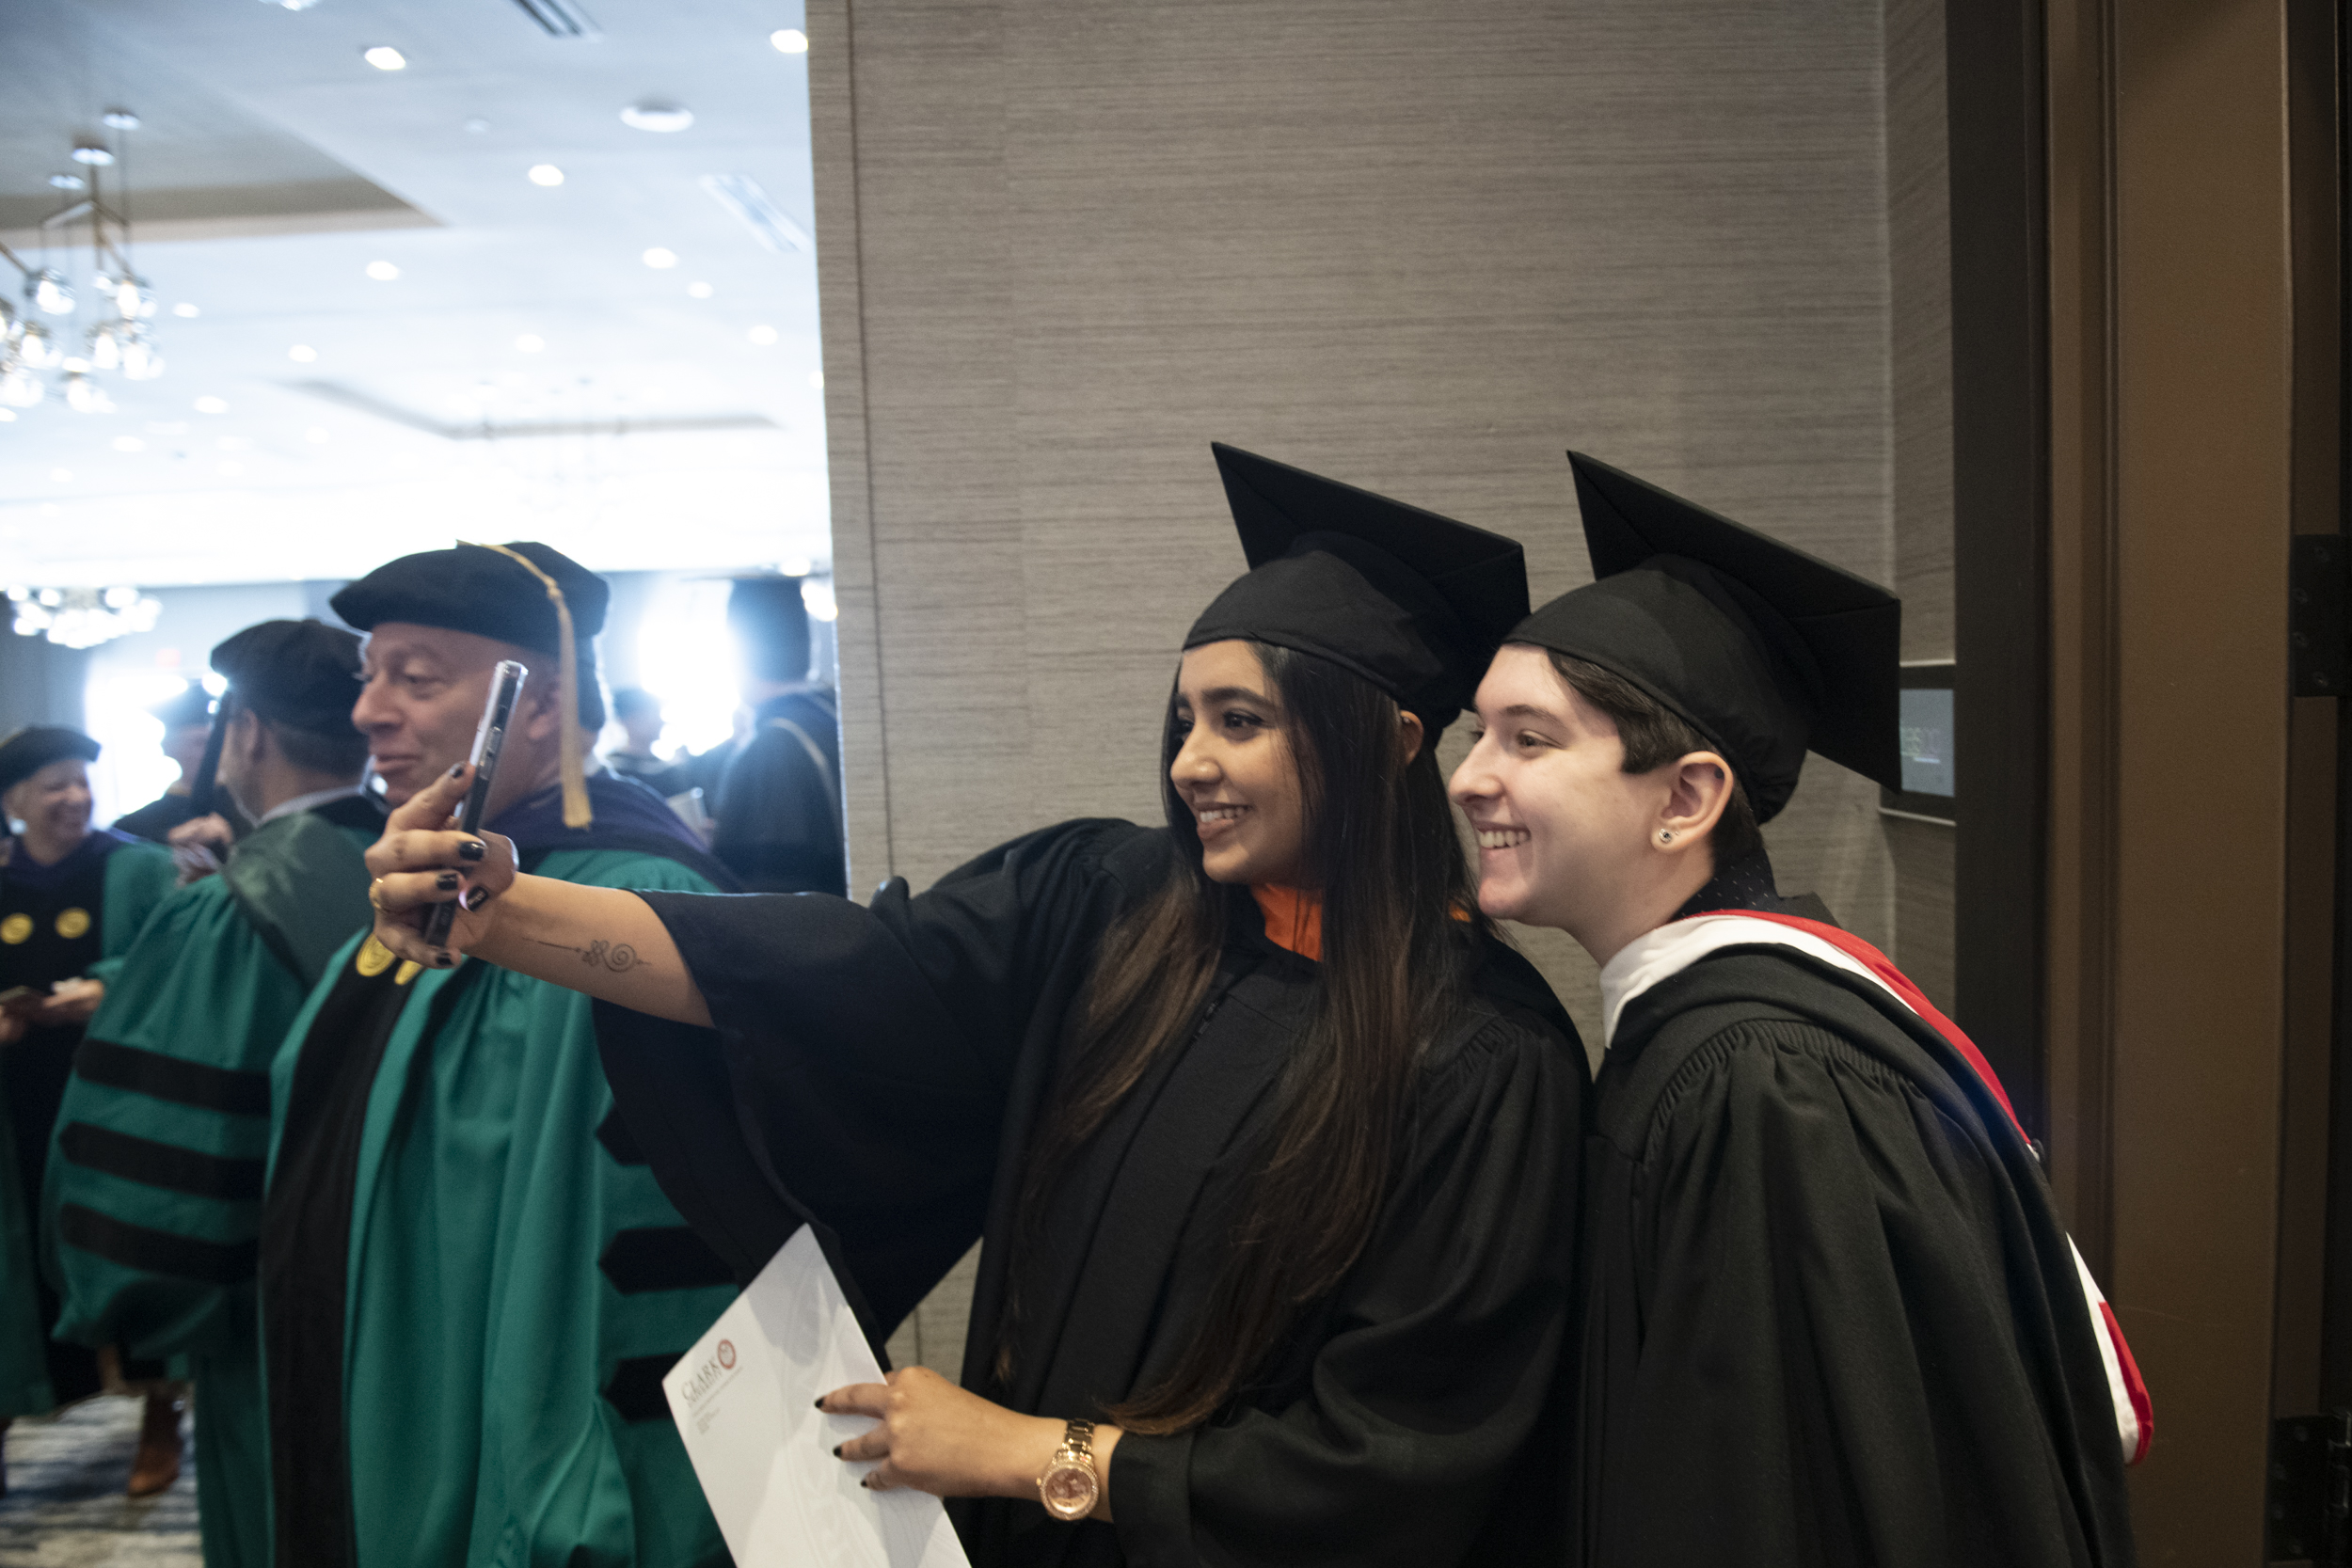 Clark students Rena Zisser ’24 and Aditi Singh, M.S. ’22 take a selfie before the inauguration ceremony